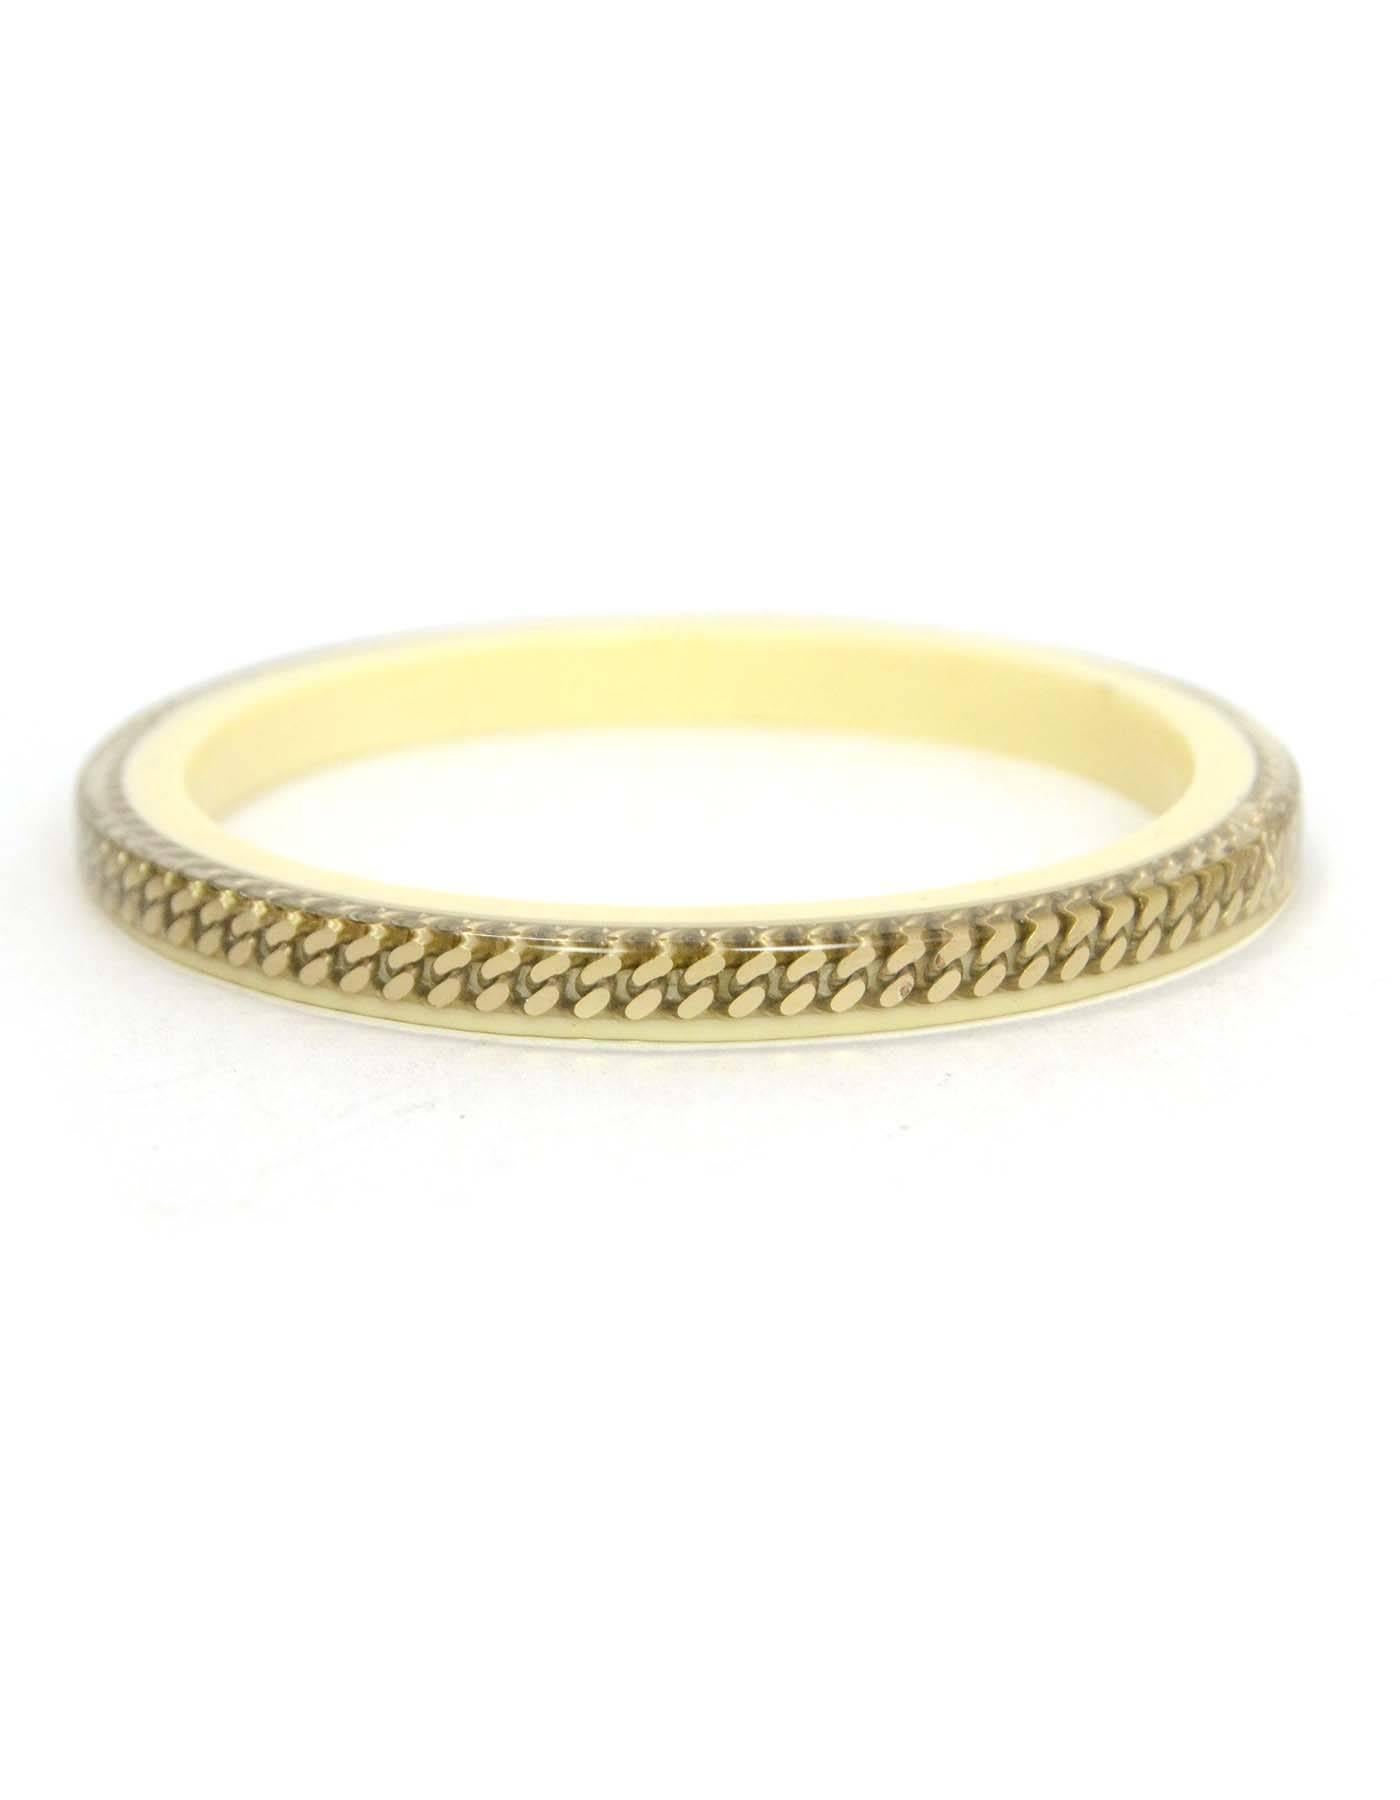 Chanel Ivory Resin & Chain Link Bangle
Features CC charms between chainlink inside of resin
Color: Ivory and goldtone
Materials: Resin and metal
Closure: None
Overall Condition: Excellent pre-owned condition with the exception of missing date